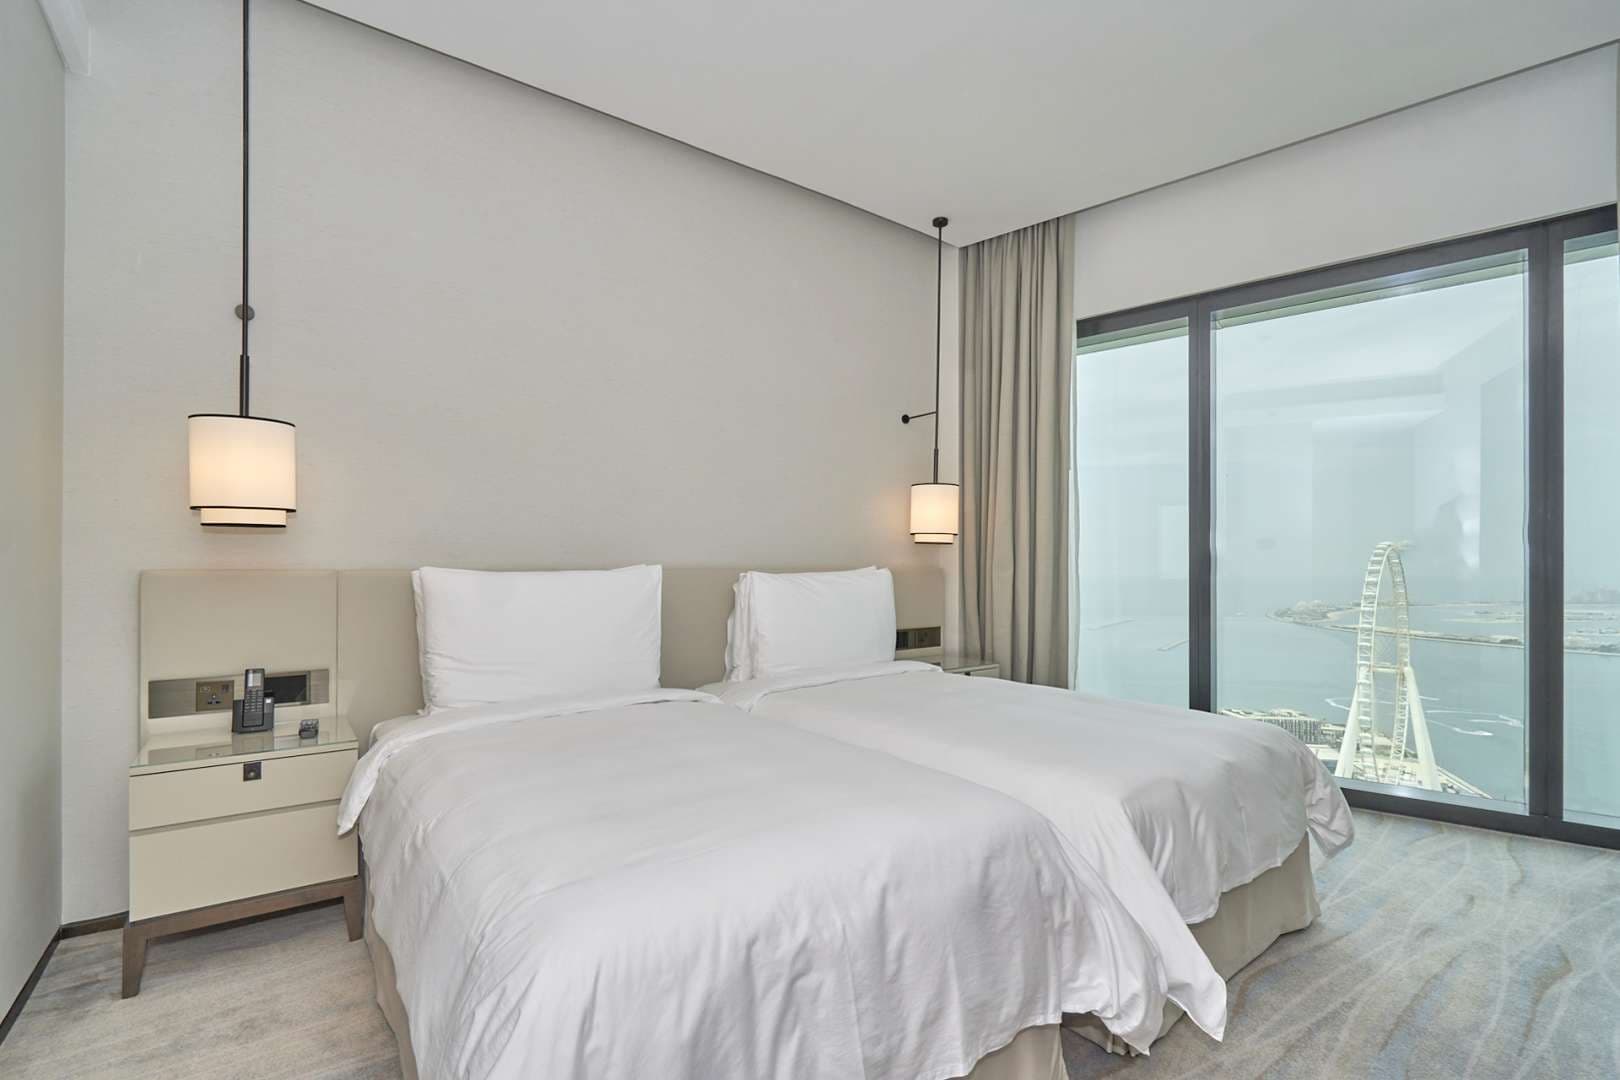 2 Bedroom Apartment For Rent The Address Jumeirah Resort And Spa Lp08765 82a8dd1adc55300.jpg